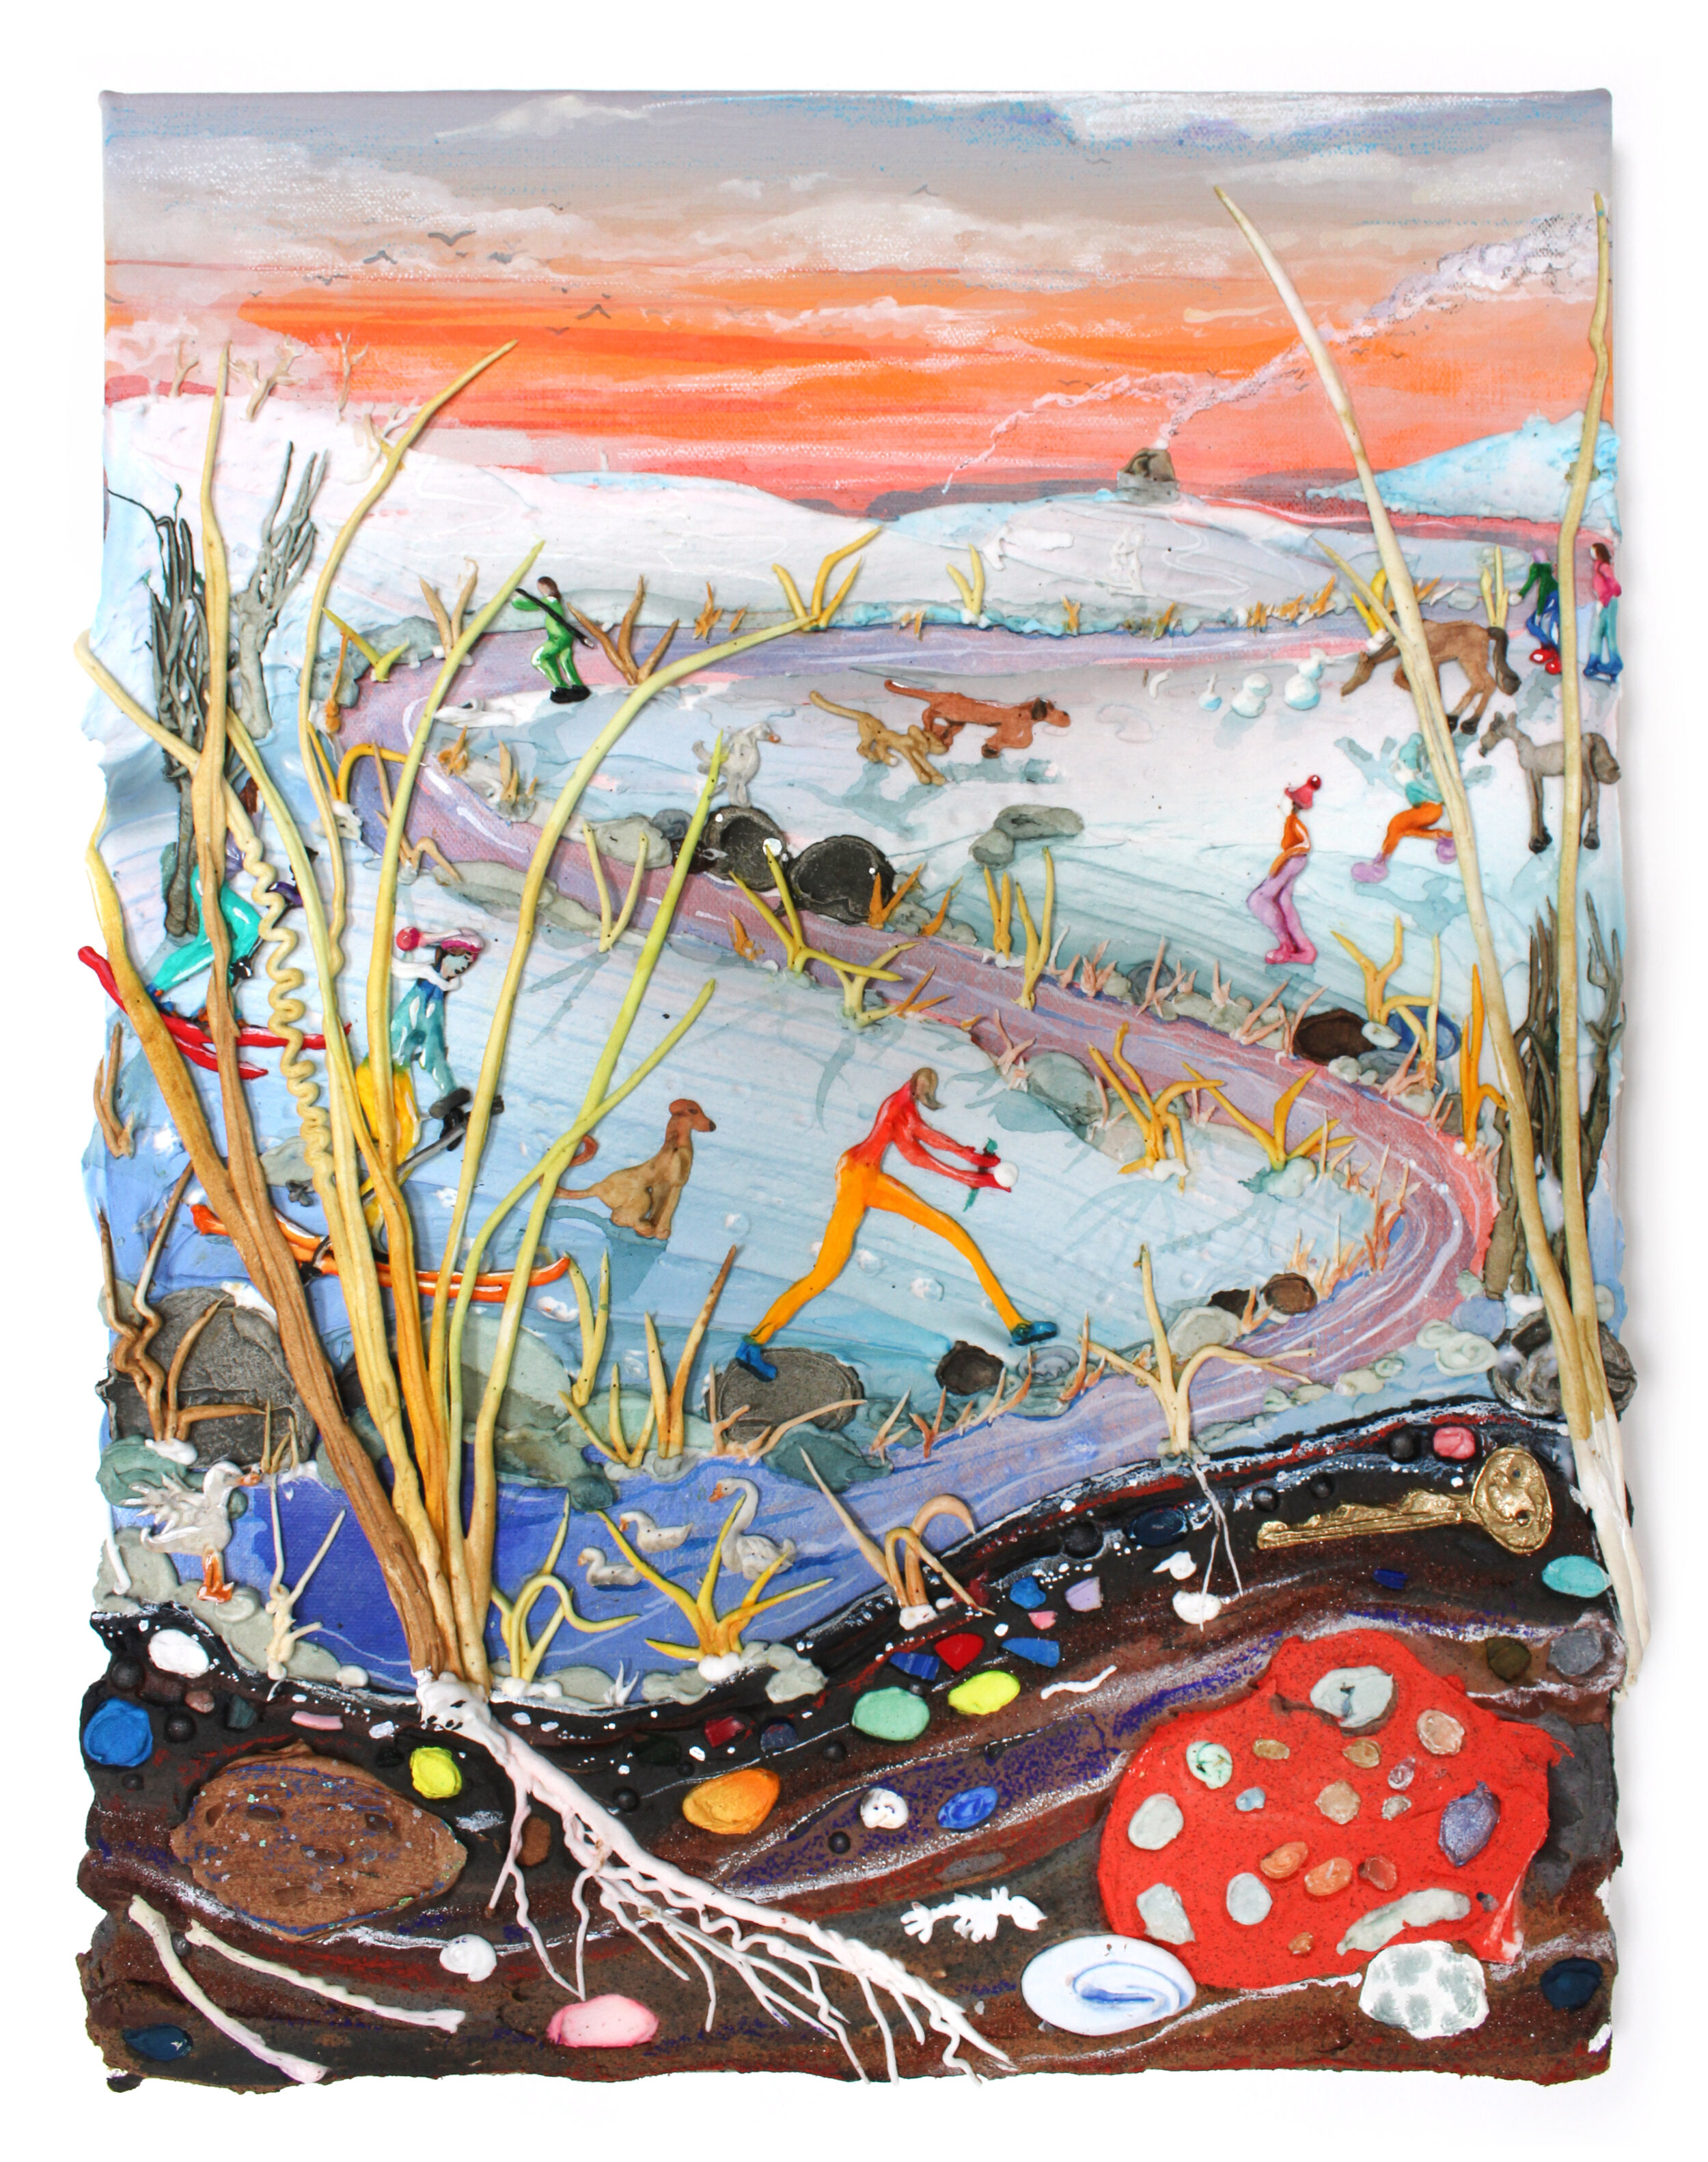   A Walk In The Snow , 2020. Acrylic, watercolor, crushed garnet, sand, pumice, graphite, cast iron, cast brass, micro plastics from Lake Michigan, glass and oil pastel on canvas, 16.5 x 12.5 x 1.5 in. (41.9 x 31.8 x 3.9 cm)   